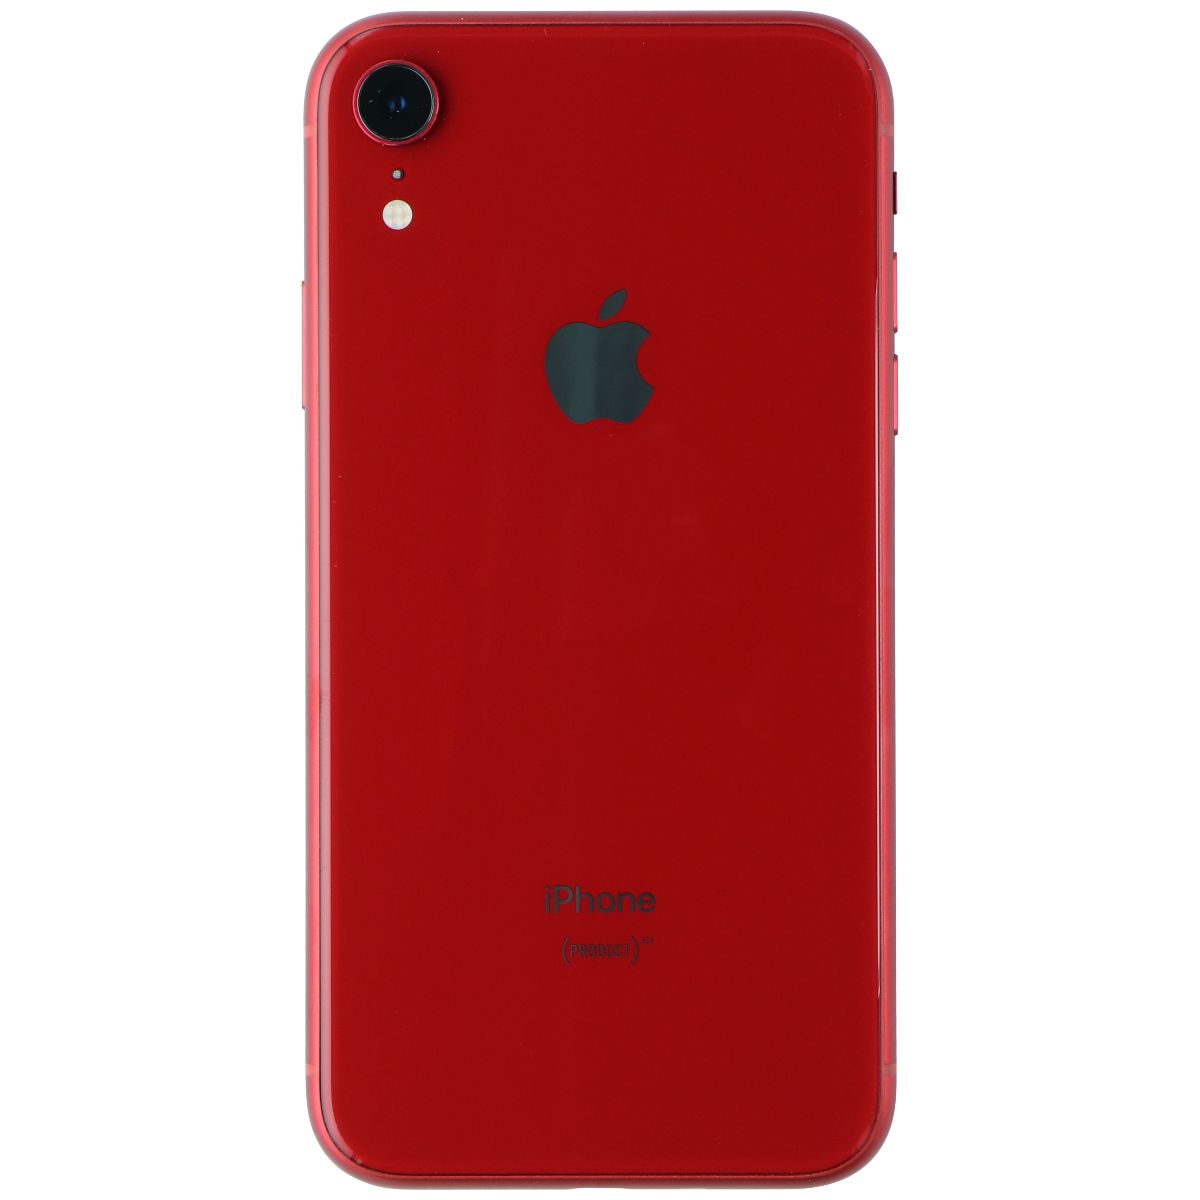 Apple iPhone XR (6.1-inch) Smartphone (A1984) Consumer Cellular Only 64GB / Red Cell Phones & Smartphones Apple    - Simple Cell Bulk Wholesale Pricing - USA Seller